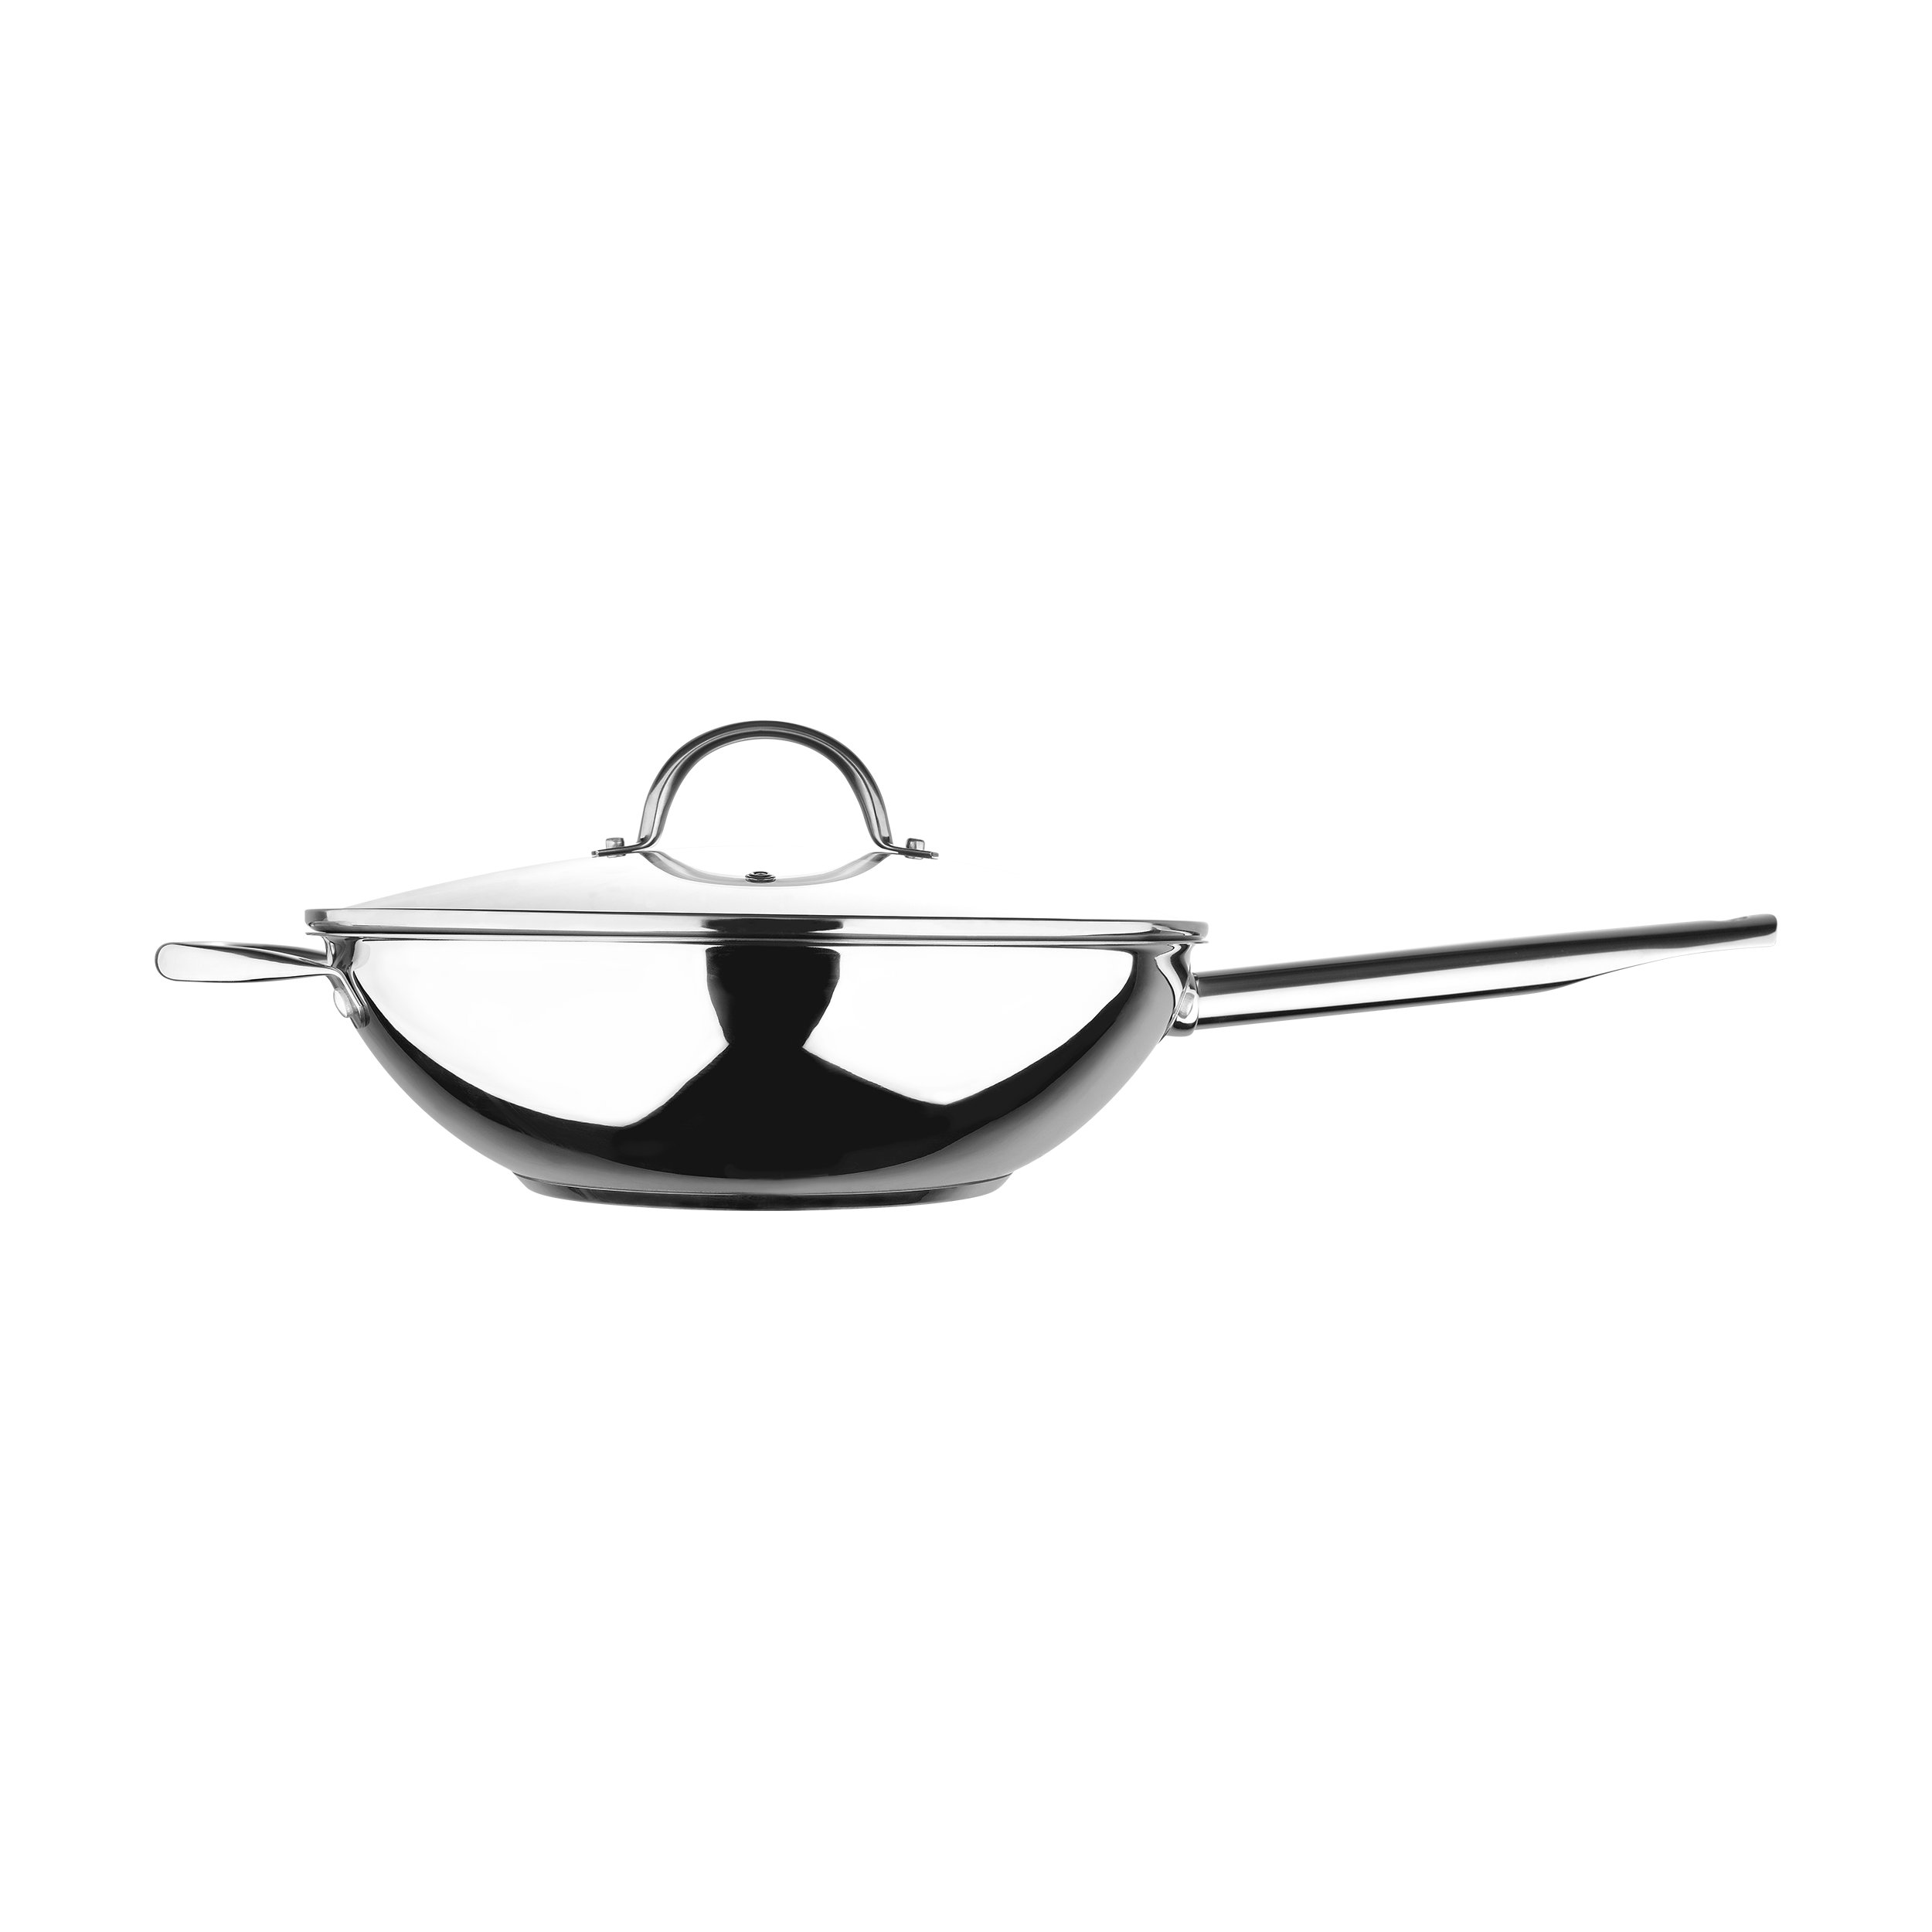 BERGNER 12 in. Stainless Steel Nonstick Frying Pan with Lid